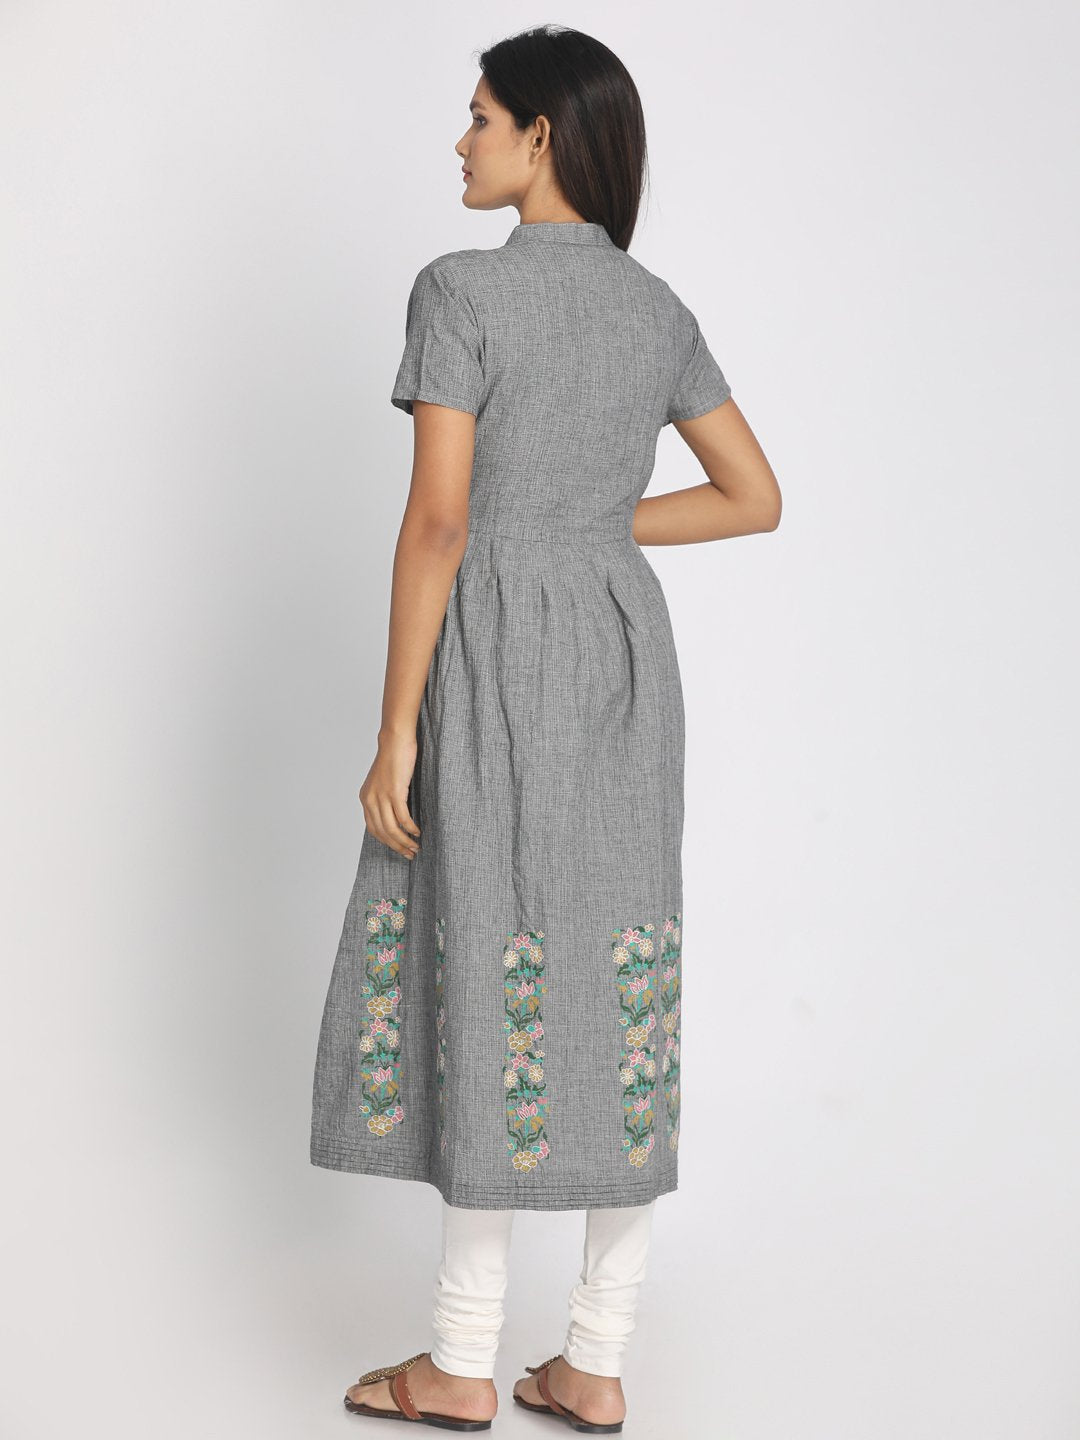 Nakshi Block Printed And Embroidered Grey Maxi Dress With Mask